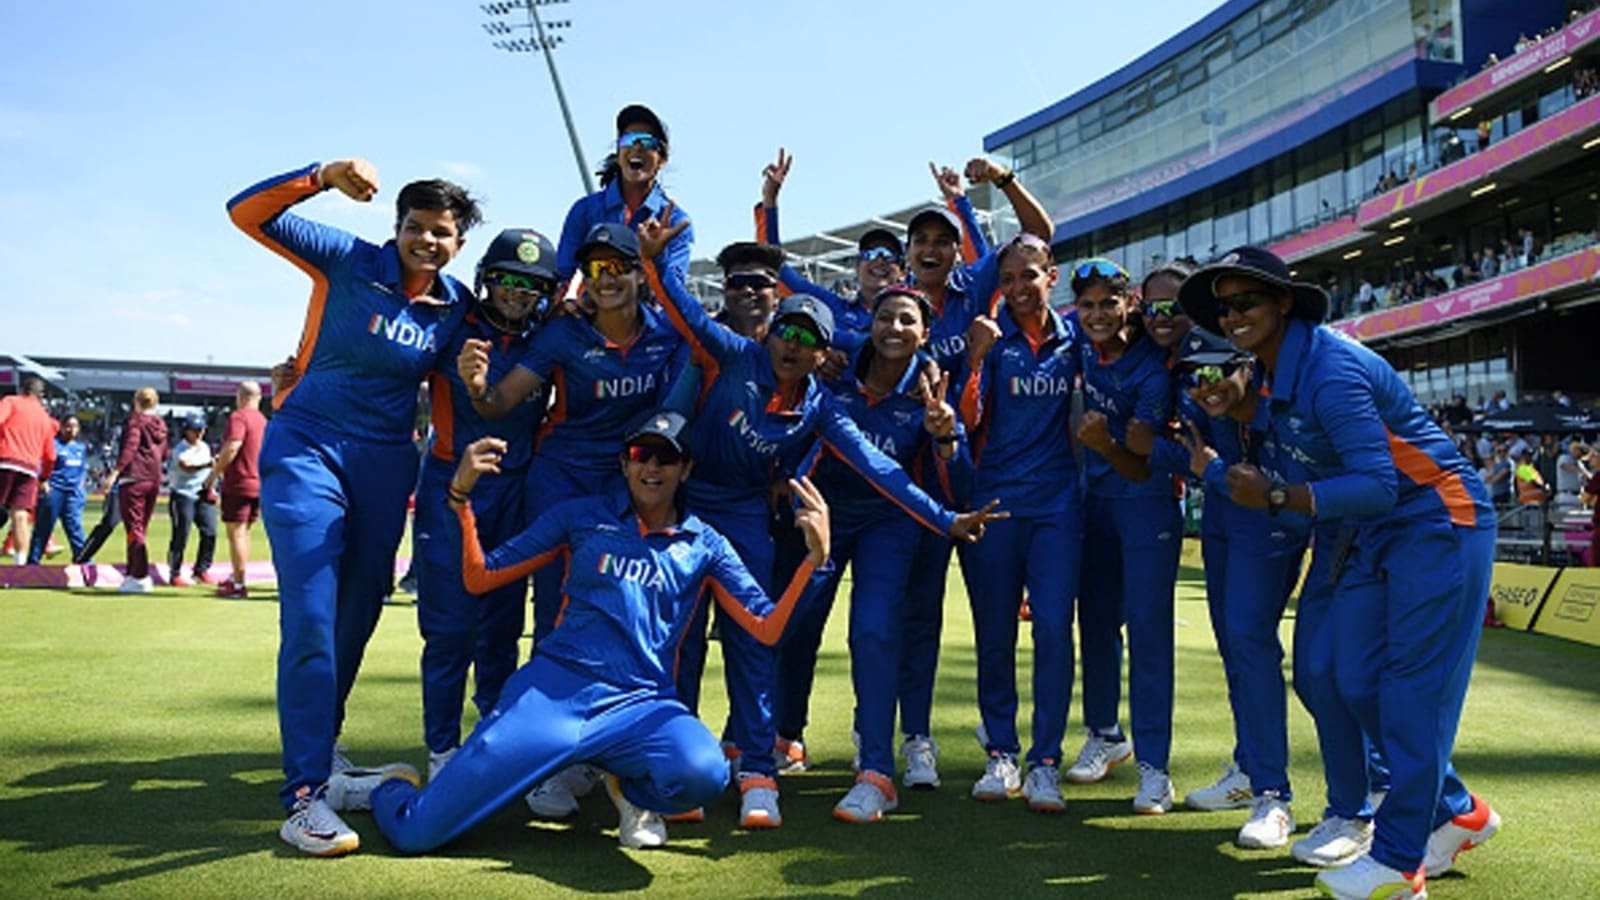 India women reach CWG 2022 cricket final, to play for gold after beating  England - Hindustan Times